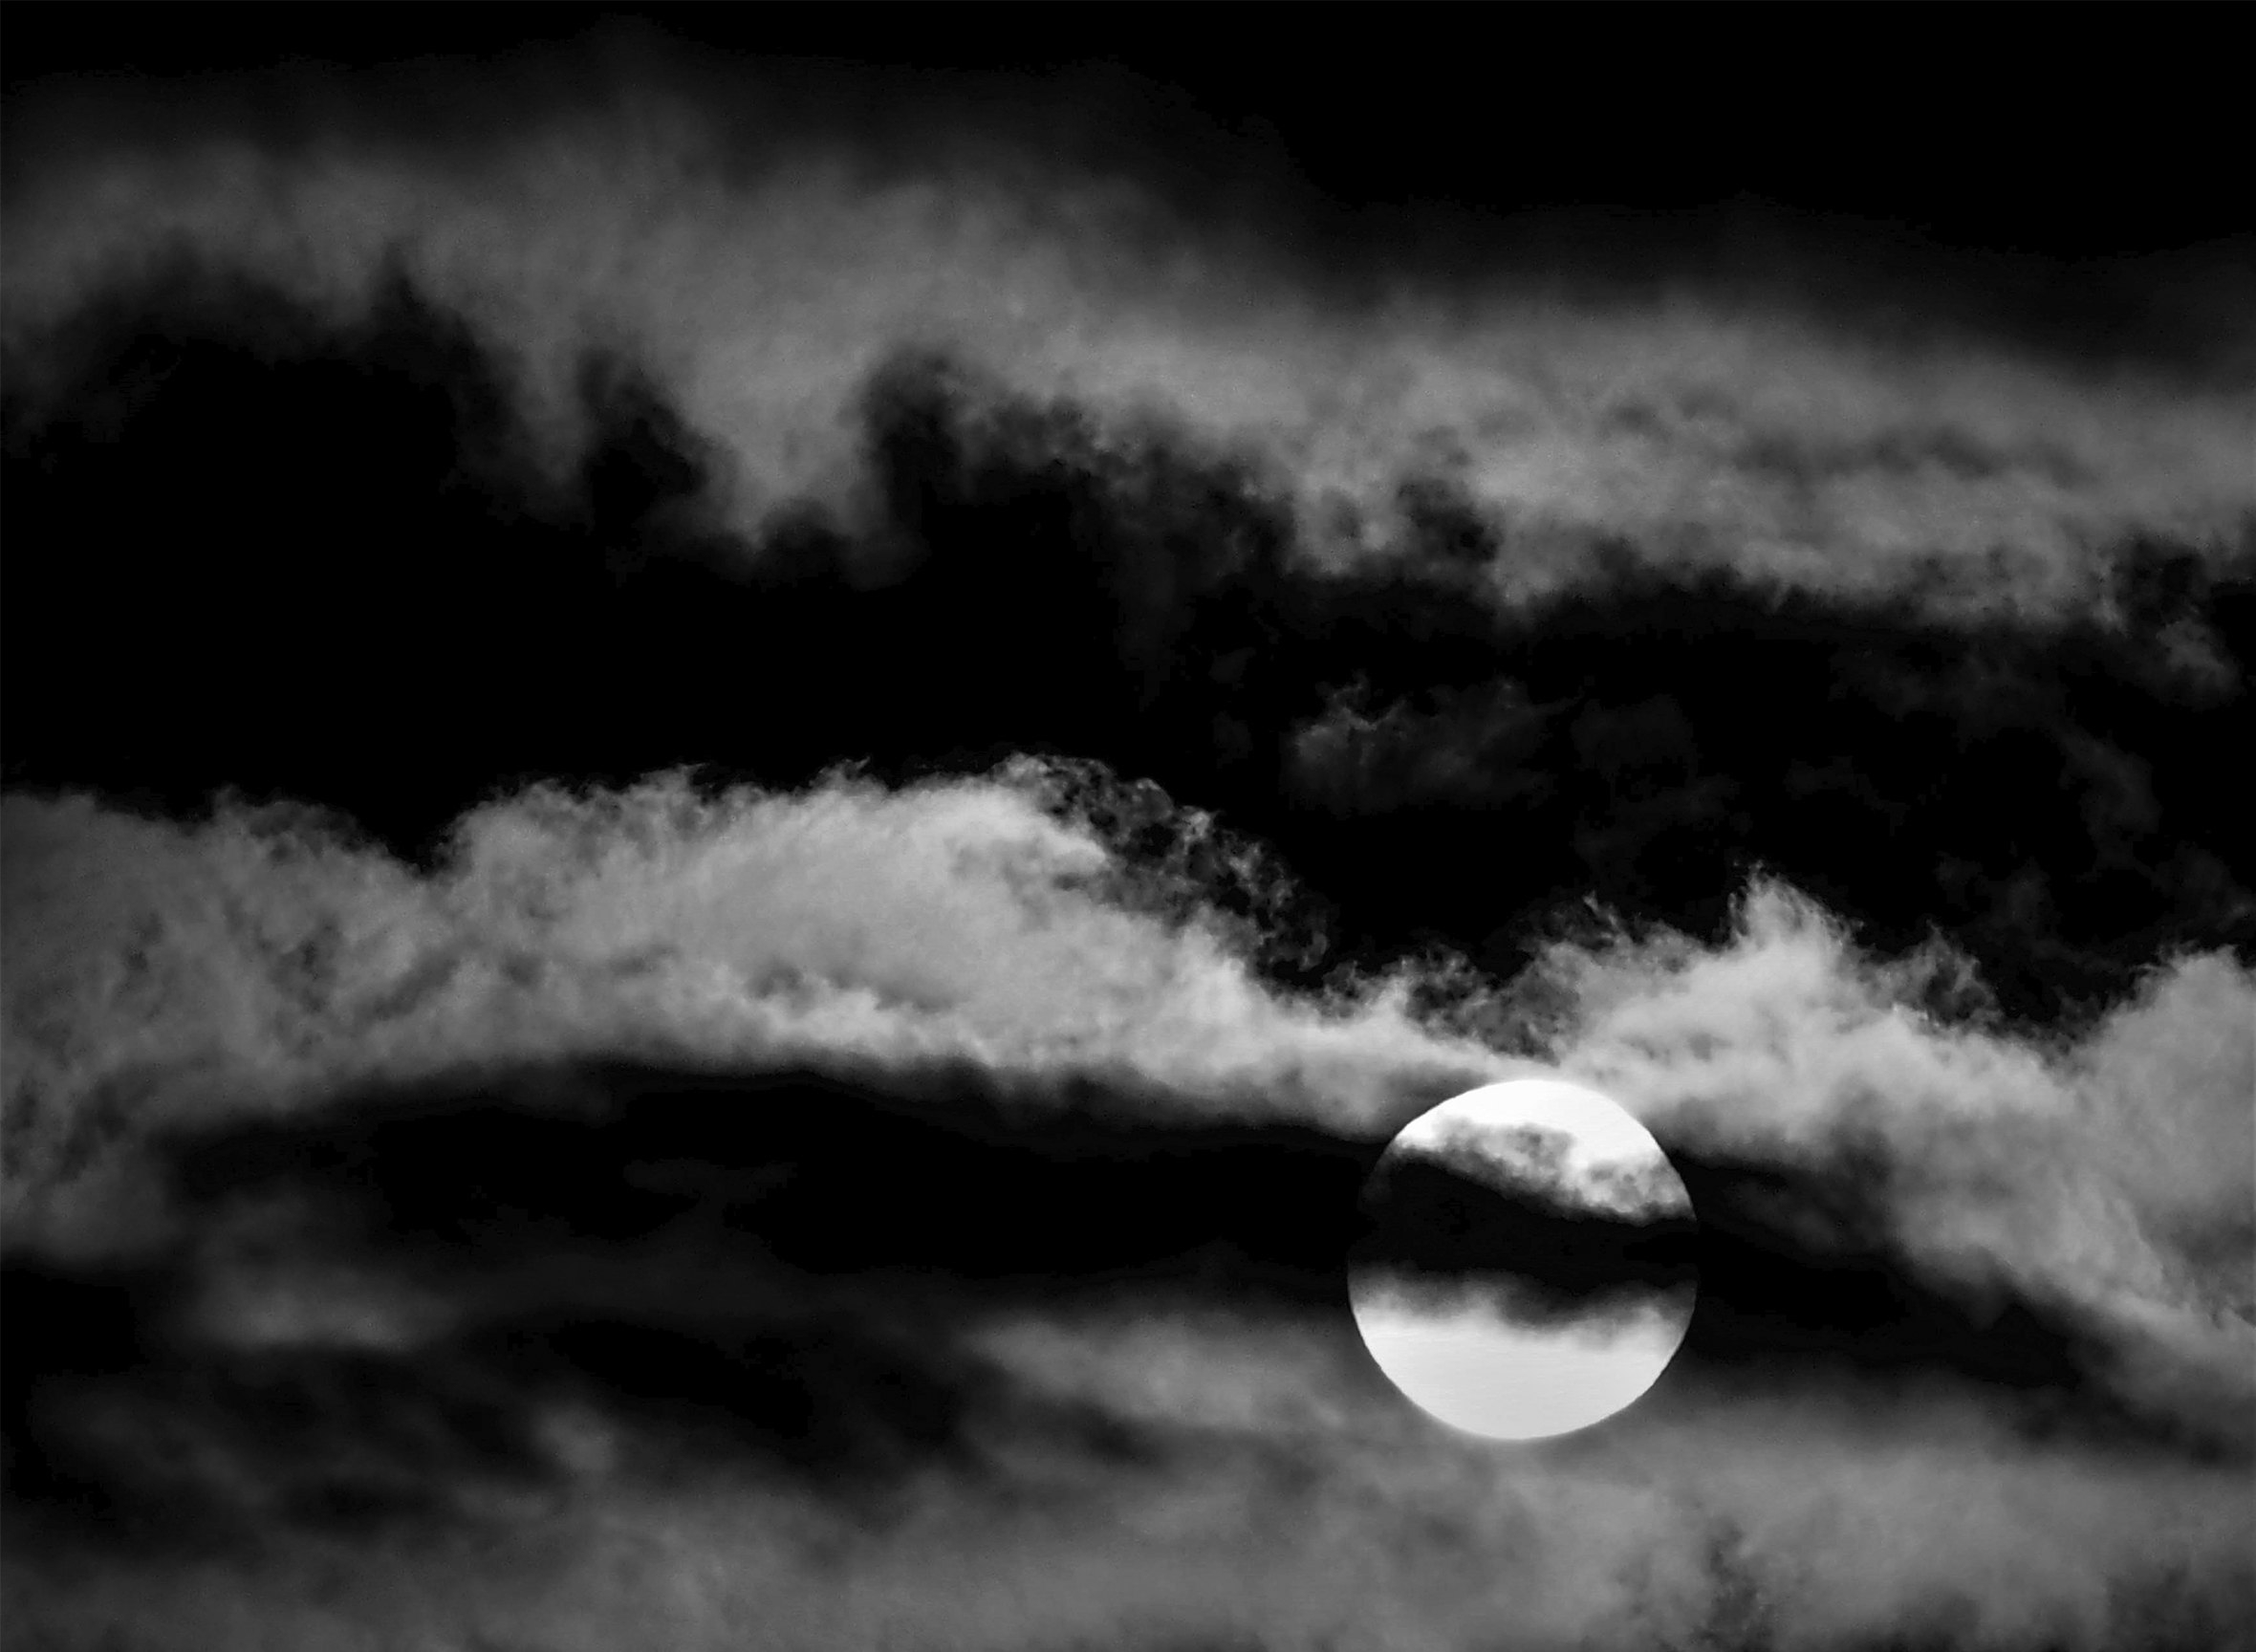 A night sky with strips of clouds that span the entire image in layers. A dark cloud that cuts across the middle of the full moon.